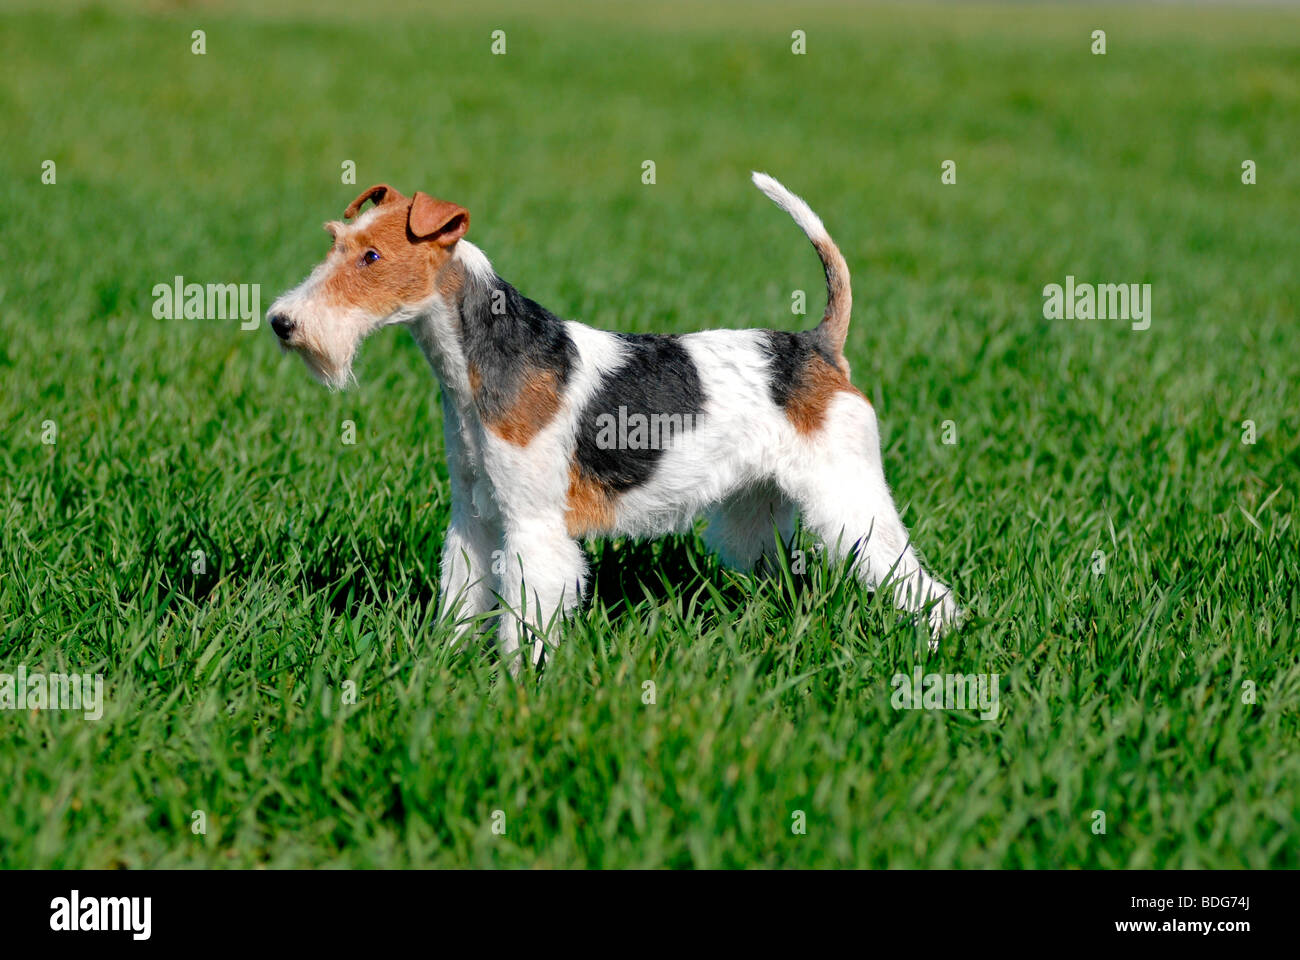 Wire-haired Fox Terrier standing on a lawn Stock Photo